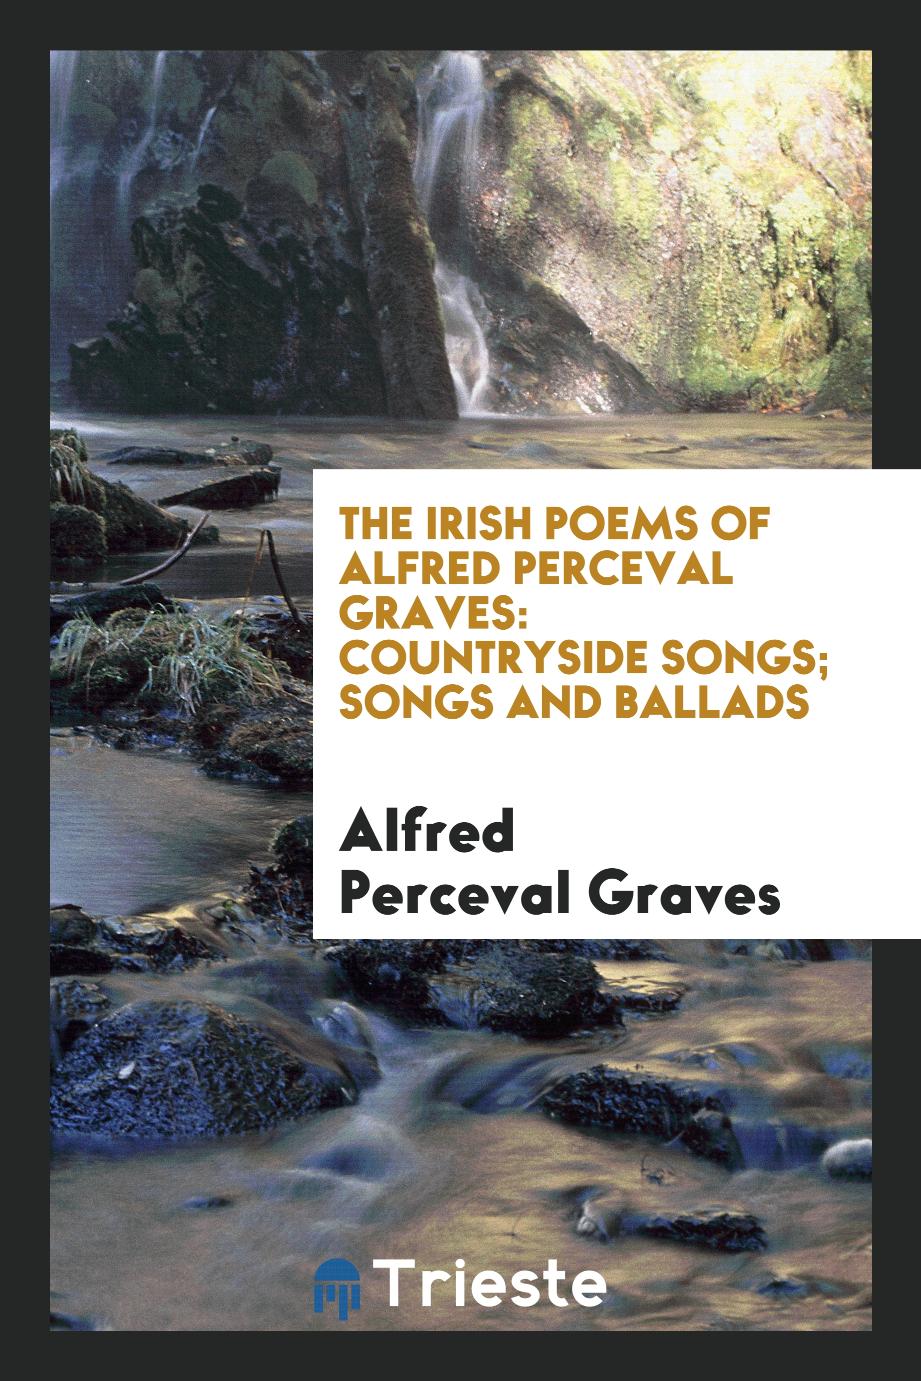 The Irish Poems of Alfred Perceval Graves: Countryside Songs; Songs and Ballads